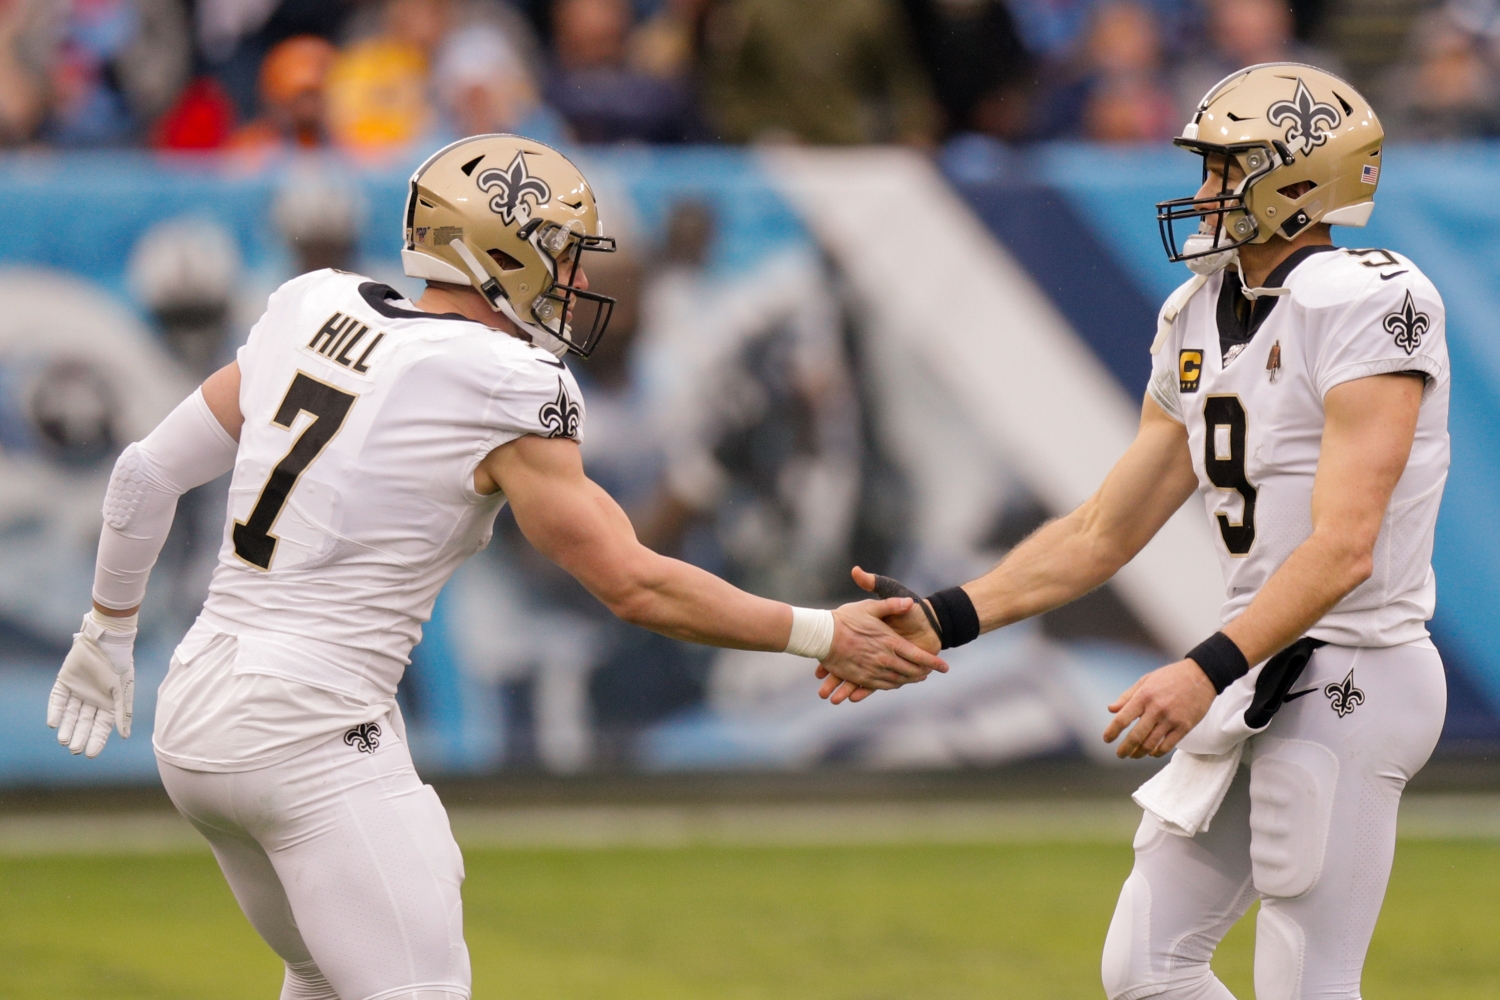 Taysom Hill shakes hands with New Orleans Saints teammate Drew Brees.